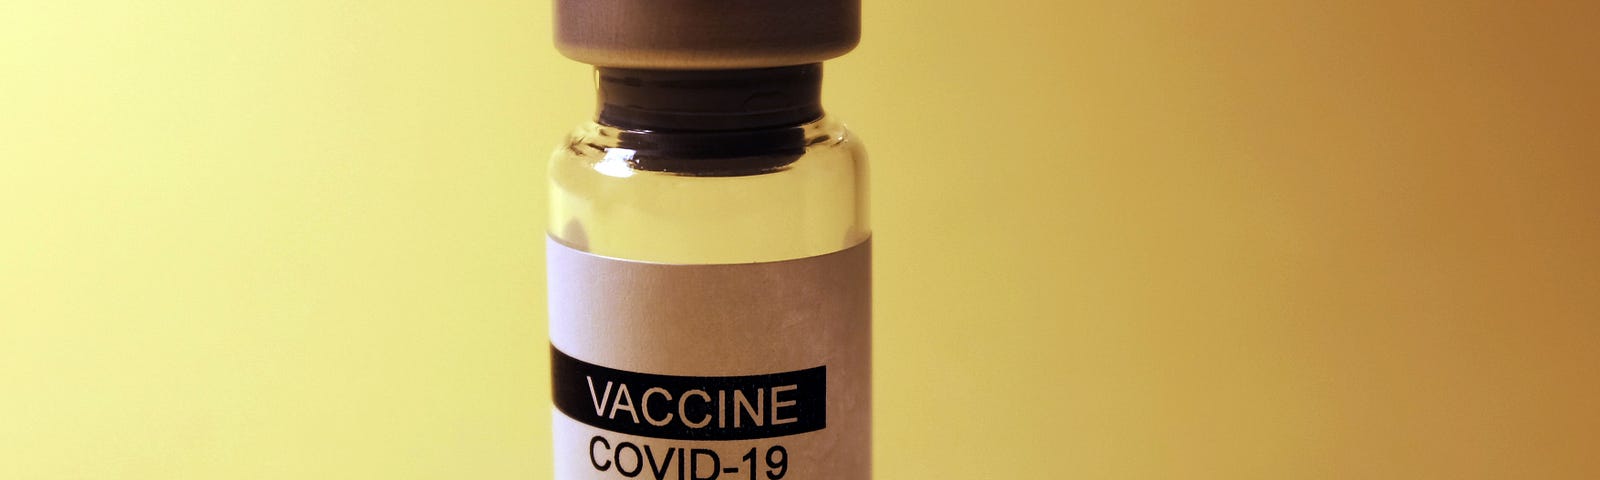 Picture of a COVID-19 vaccine bottle against a yellow background.